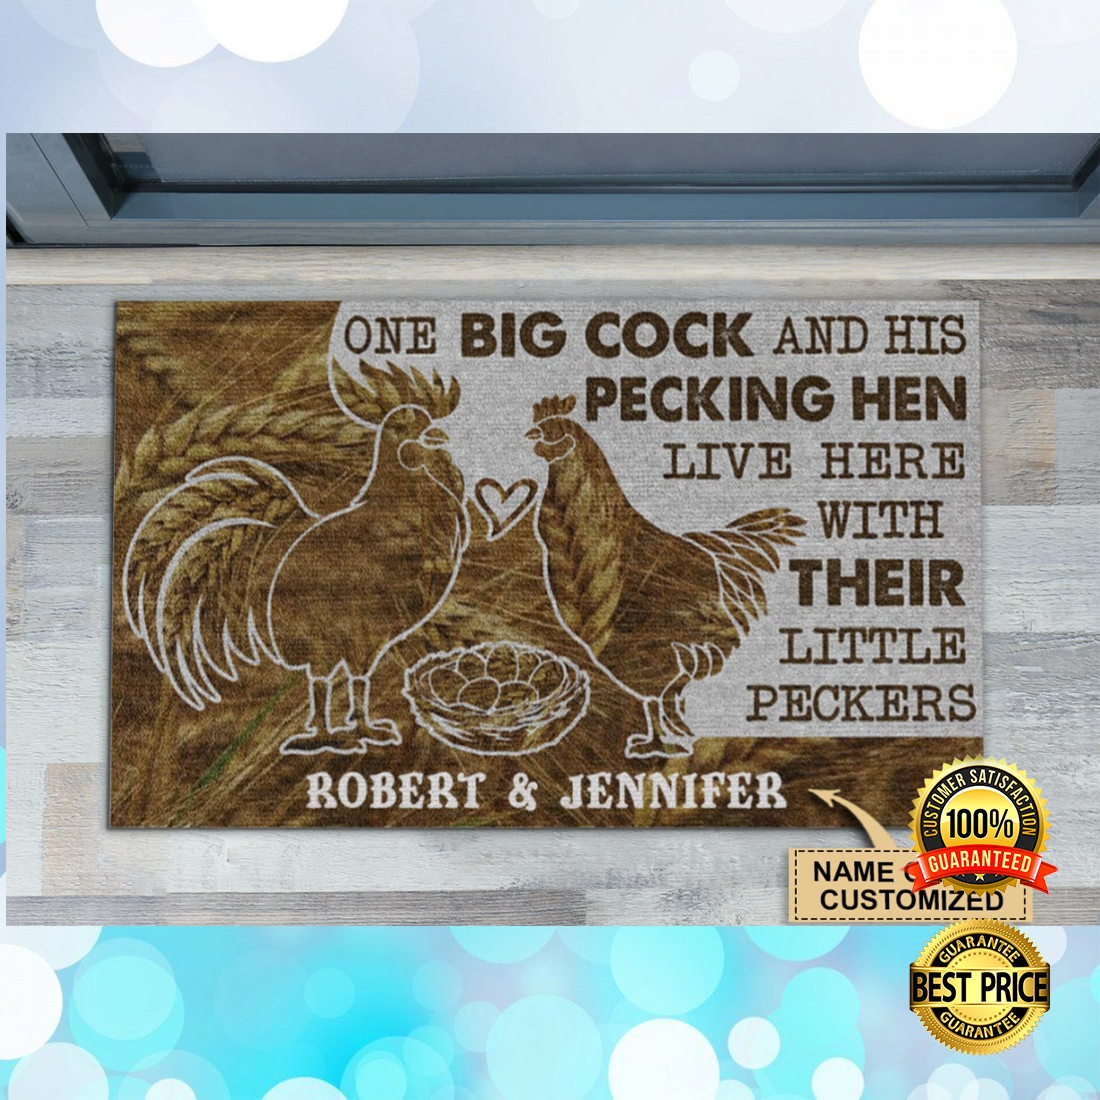 Personalized one big cock and his pecking hen live here with their little peckers doormat 5